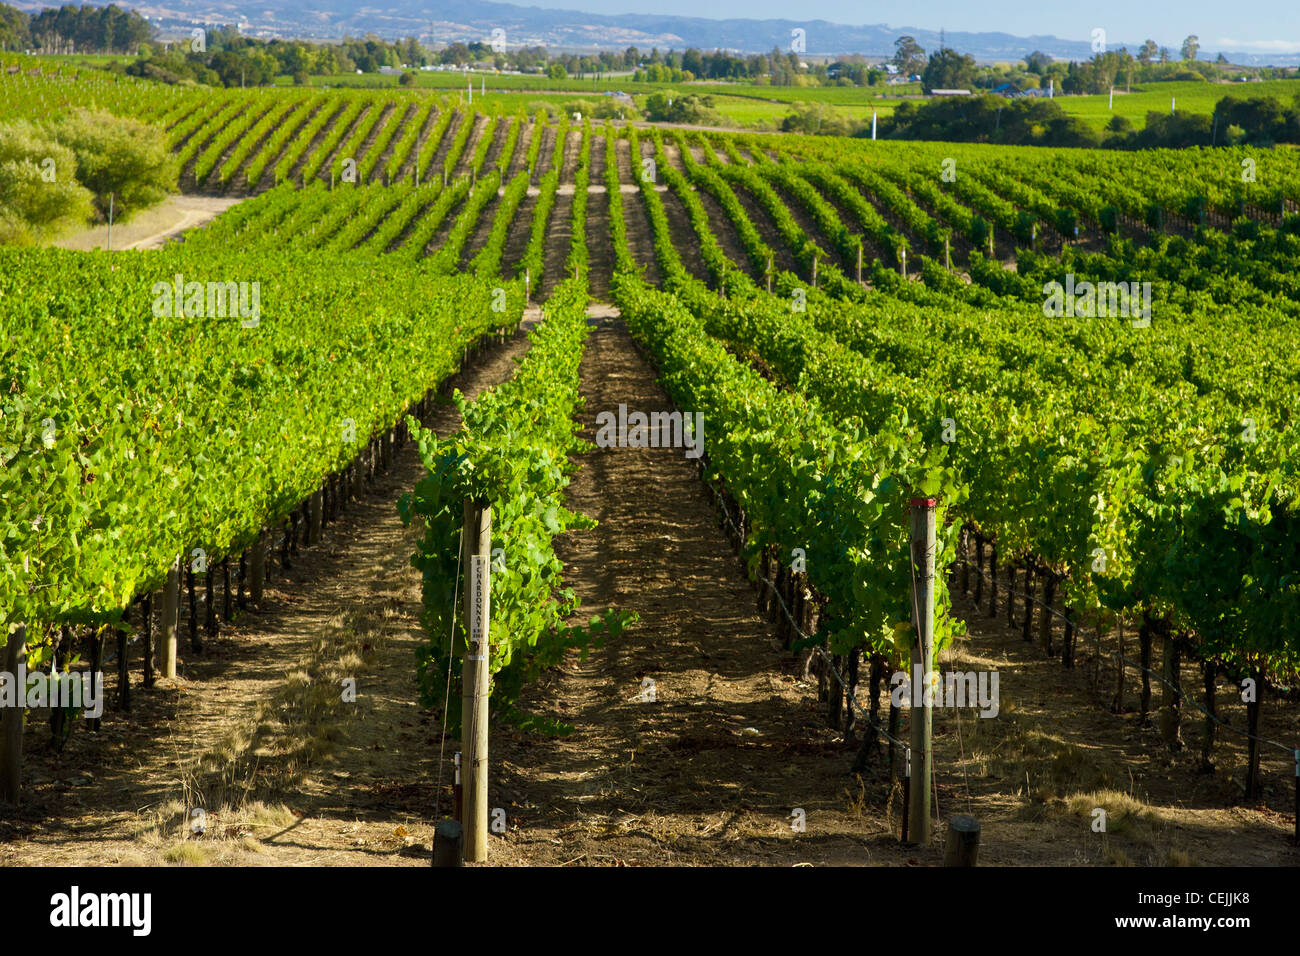 Agriculture - Rolling mid-summer wine grape vineyard with oak trees on the hillsides / near Clements, California, USA. Stock Photo